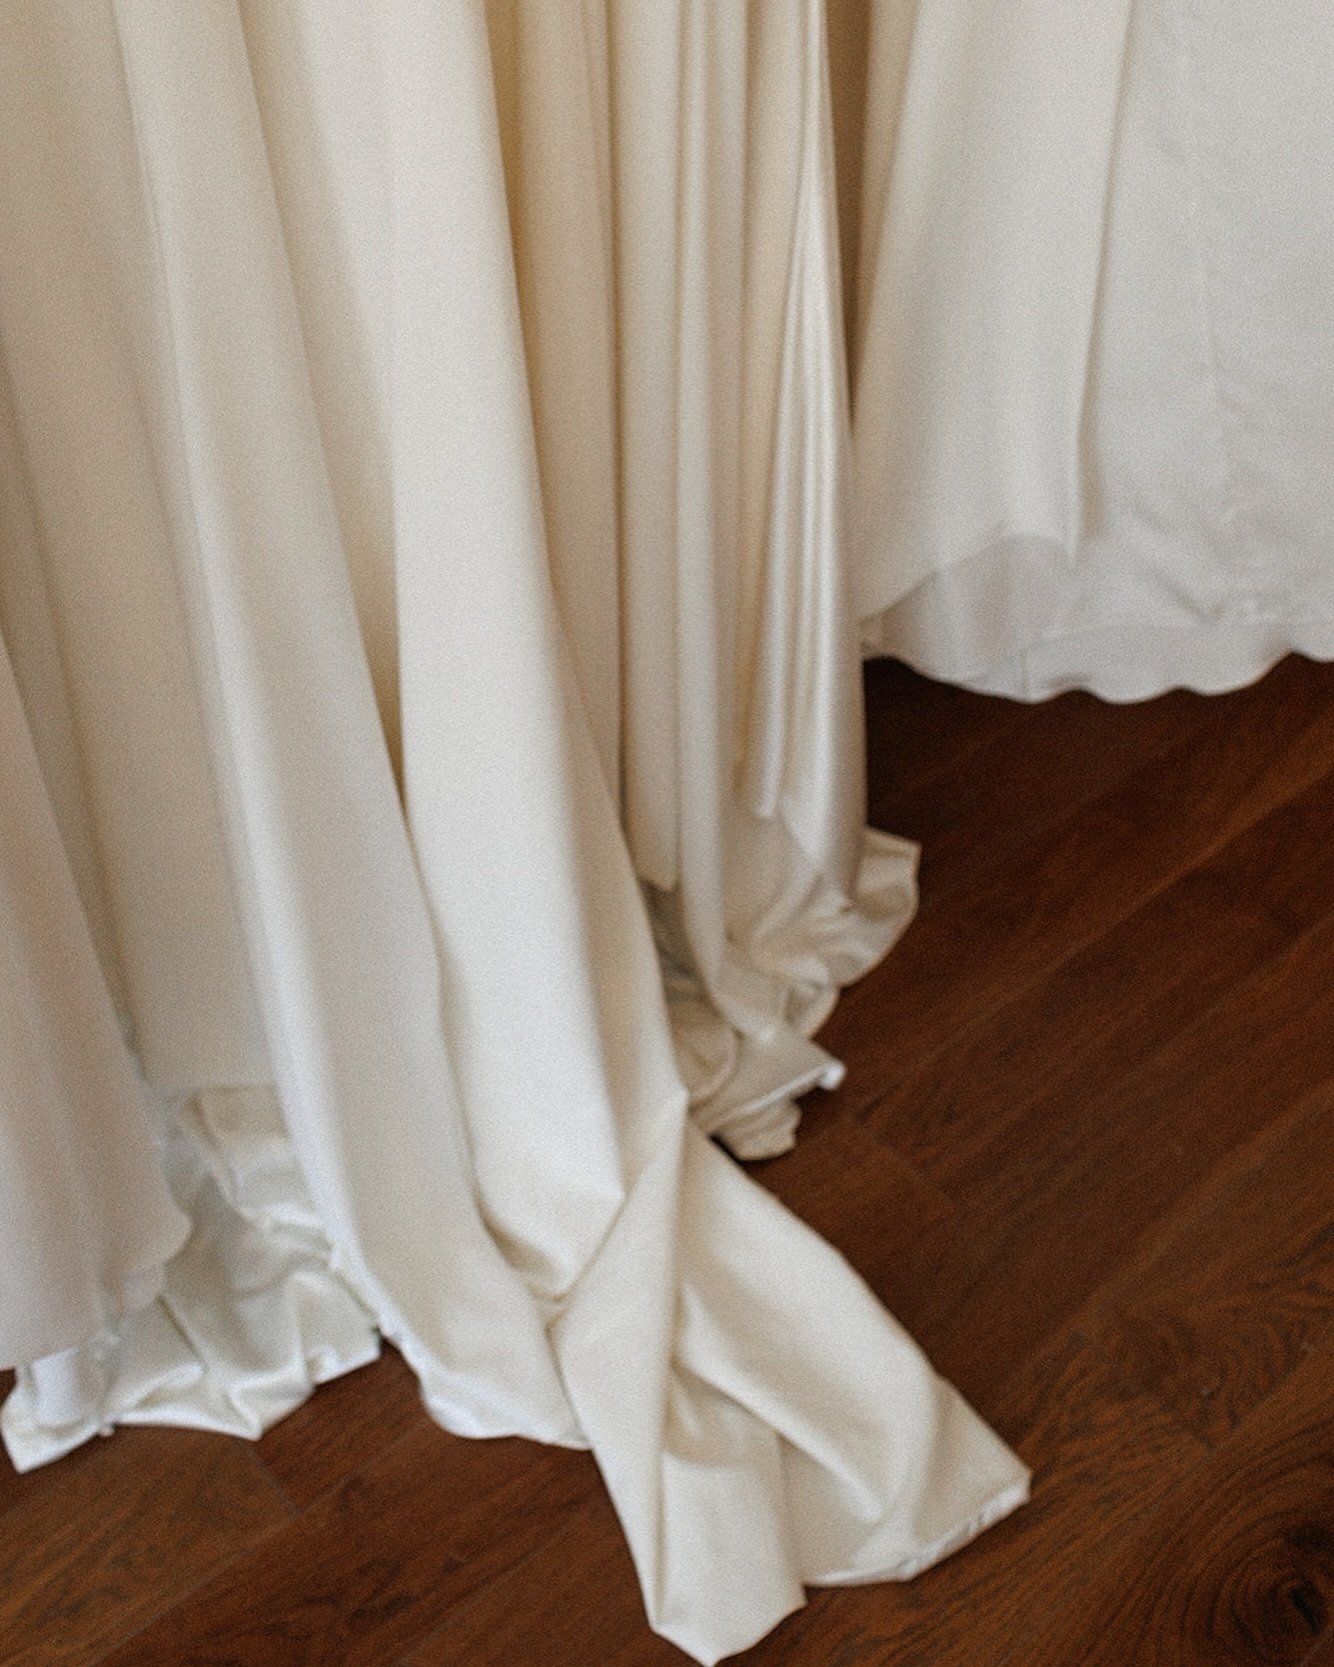 Let's talk about fabrics 🕊️&mdash; at the Briderie, we offer 𝘤𝘩𝘰𝘪𝘤𝘦.
Pure luxury silk cr&ecirc;pe | liquid silk-satin | eco-crepe 

~Smooth soft finishes or soft textures? 
~Matte or subtle sheen?
~Drape or structure?

With all things consider